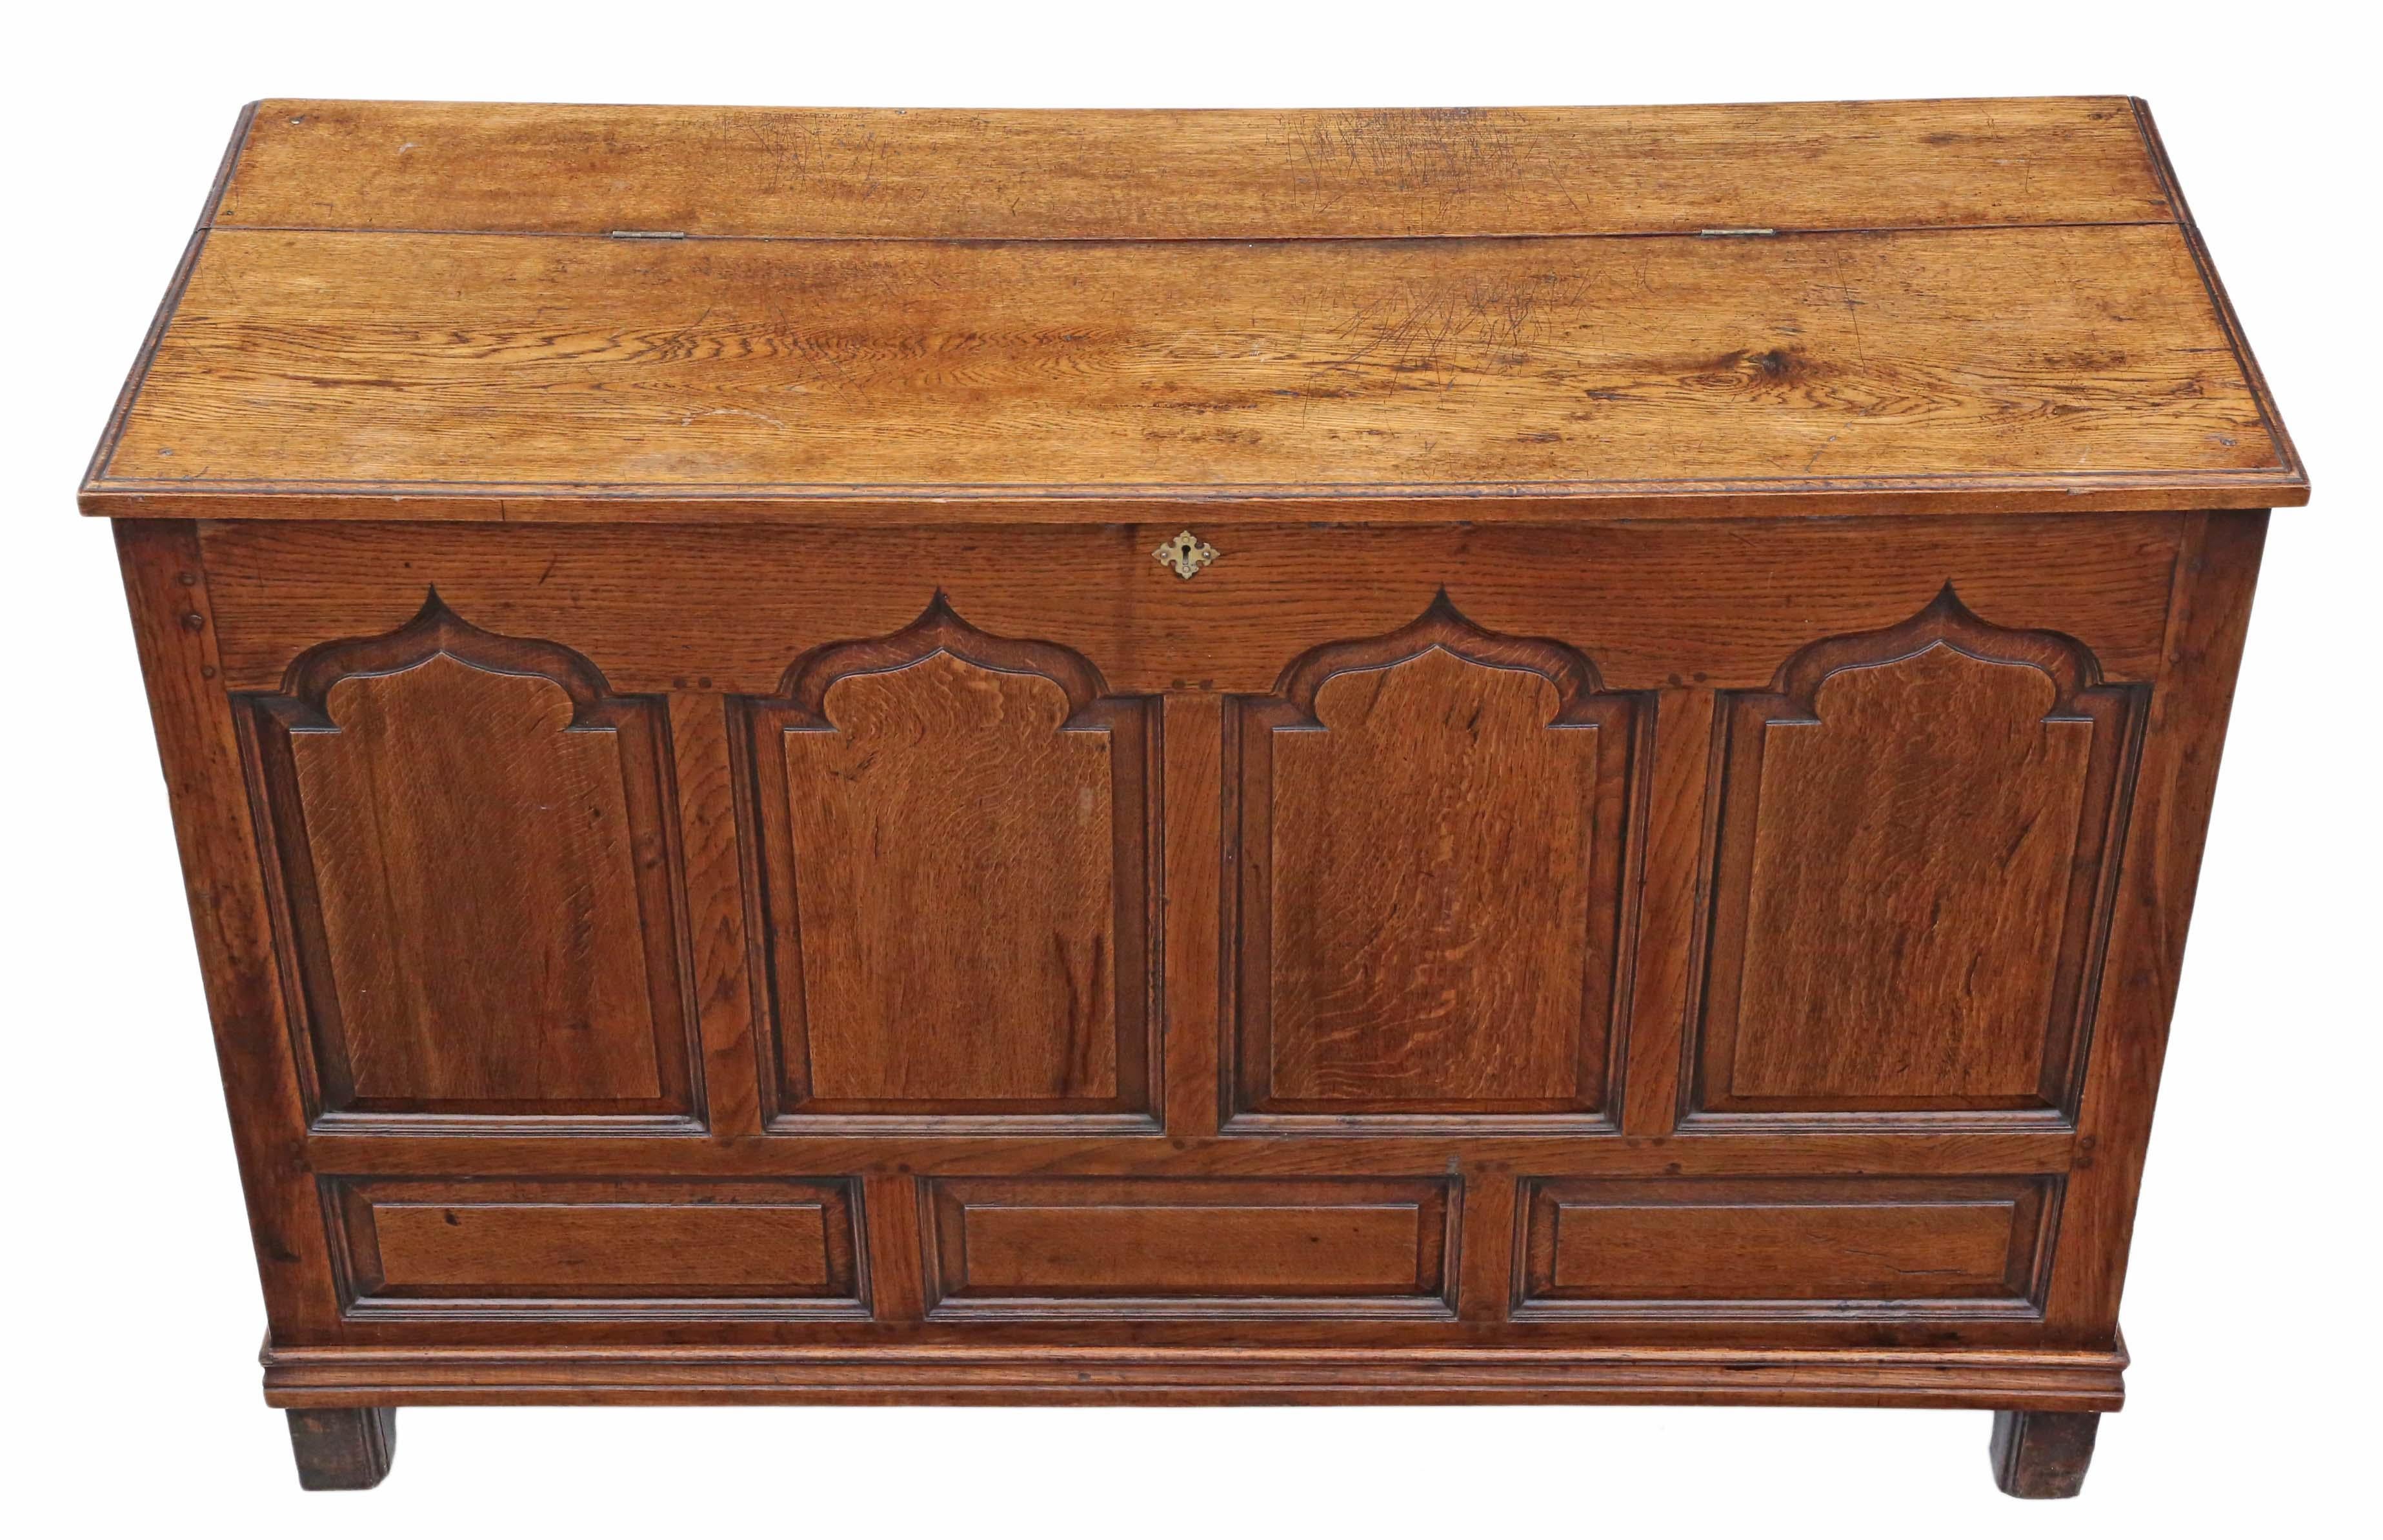 19th century Georgian oak coffer or mule chest.
Solid and strong, with no loose joints. Full of age, character and charm. Lovely mid oak colour.
Would look great in the right location!
Overall maximum dimensions: 146 cm wide, 54 cm deep, 97 cm